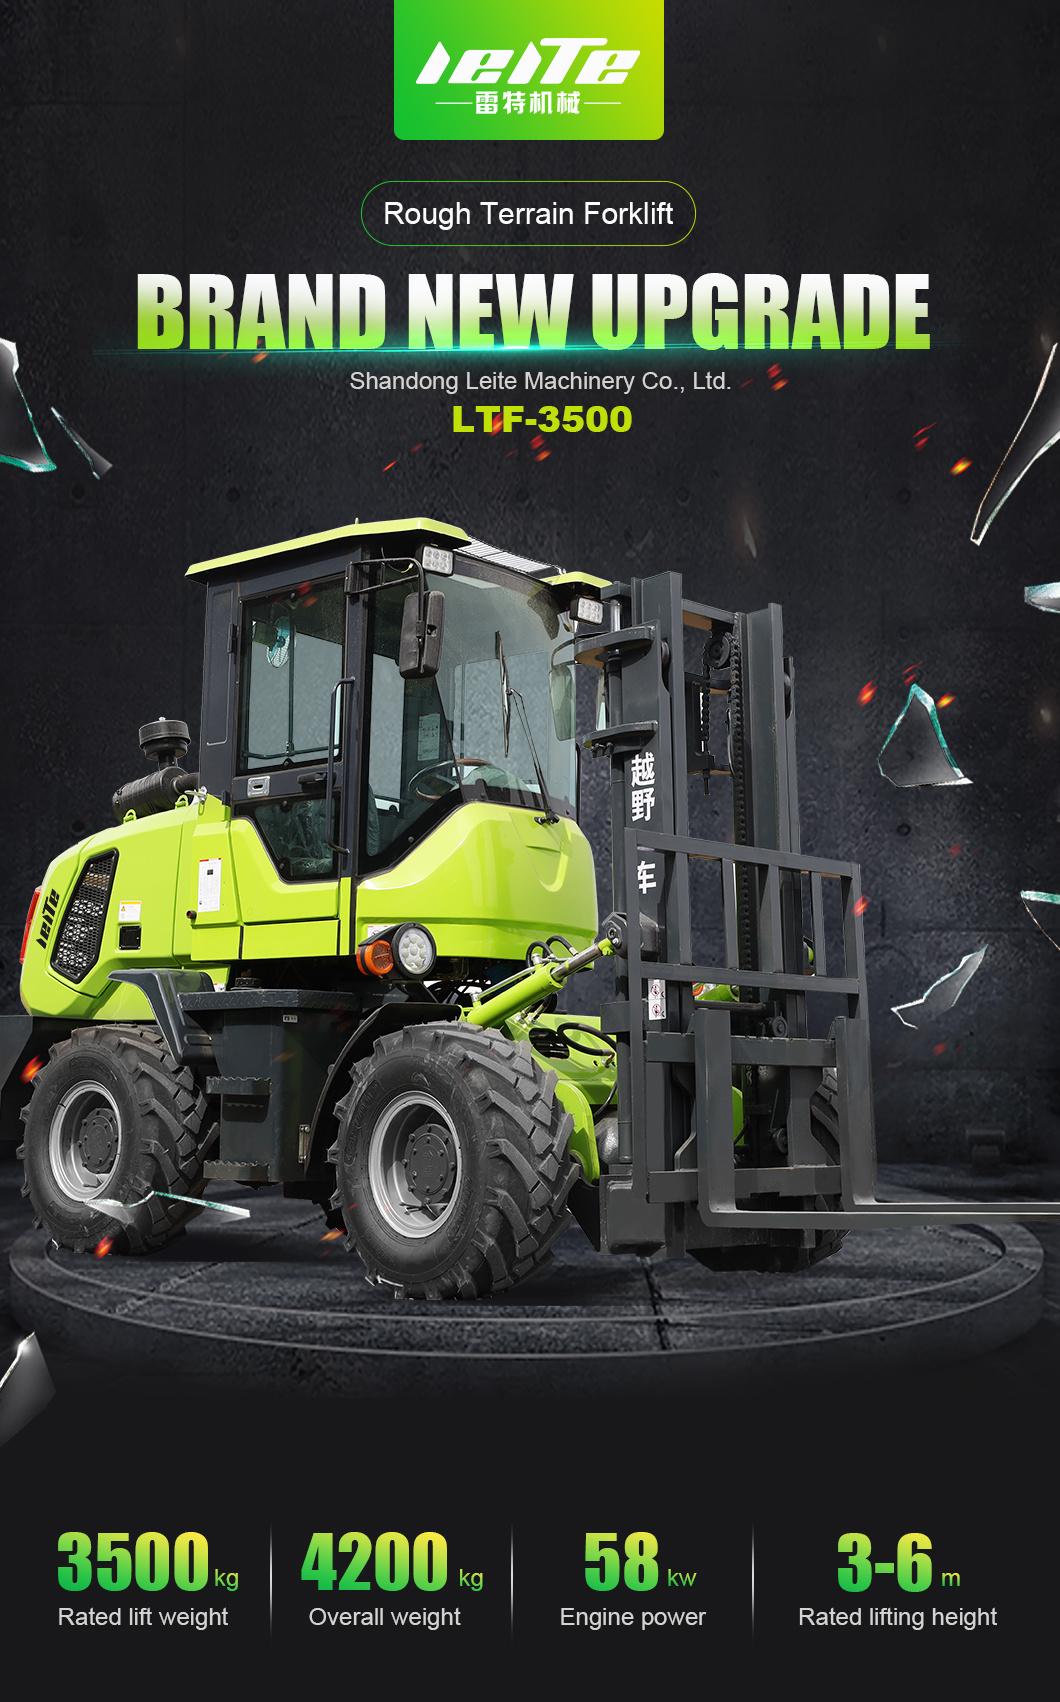 Small Loader Type 3 Ton Rough Terrain Forklift for Sale Four-Wheel Drive Cross-Country Forklift